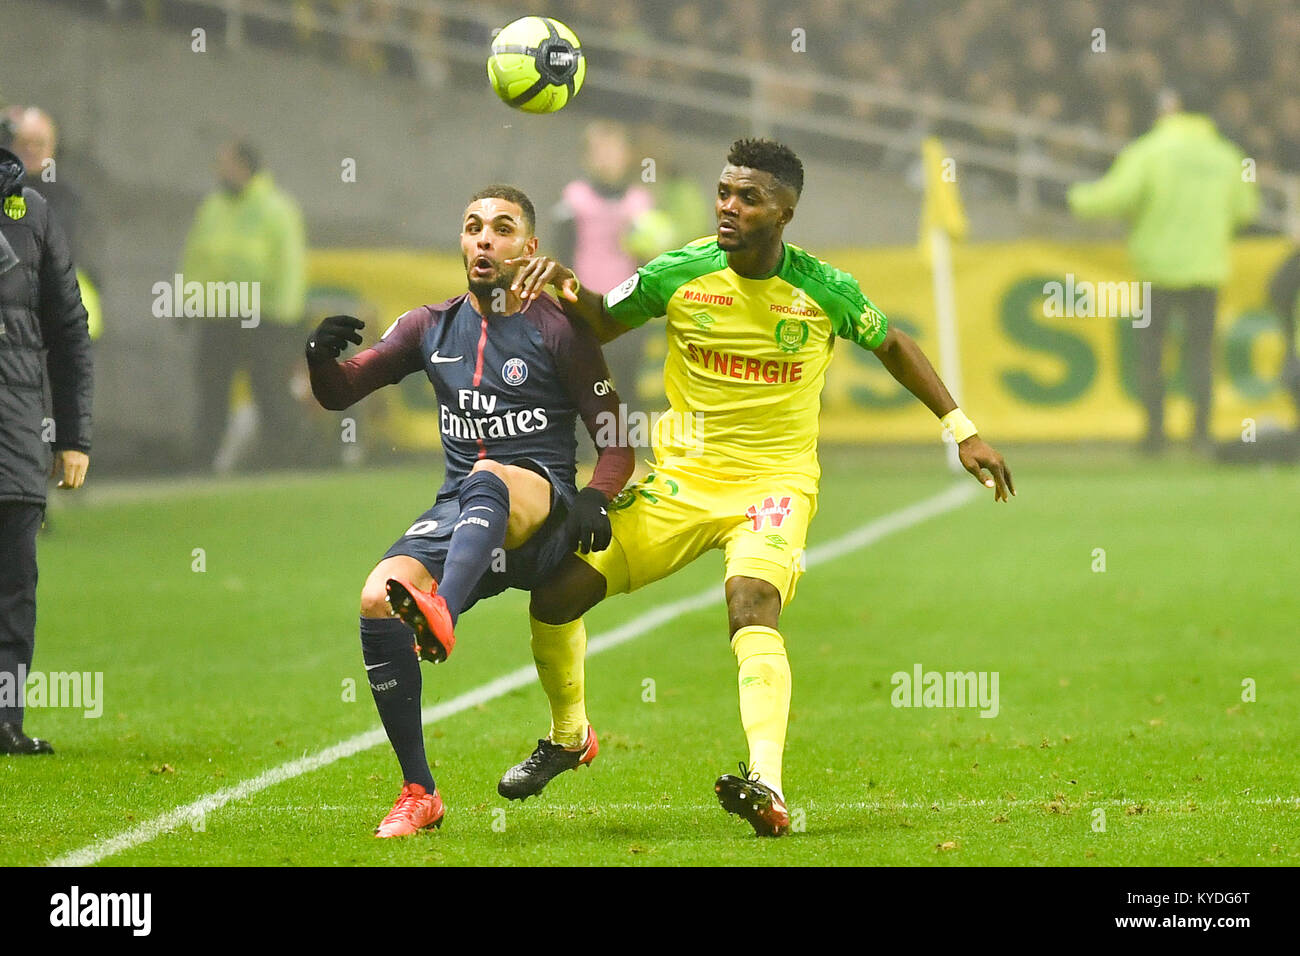 Nantes. 14th Jan, 2018. Chidozie Awaziem (R) from Nantes competes with Layvin Kurzawa from Paris Saint-Germain during the match between Nantes and Paris Saint-Germain of French Ligue 1 2017-2018 season round 20 in Nantes, France on Jan. 14, 2018. Paris Saint-Germain won 1-0. Credit: Chen Yichen/Xinhua/Alamy Live News Stock Photo